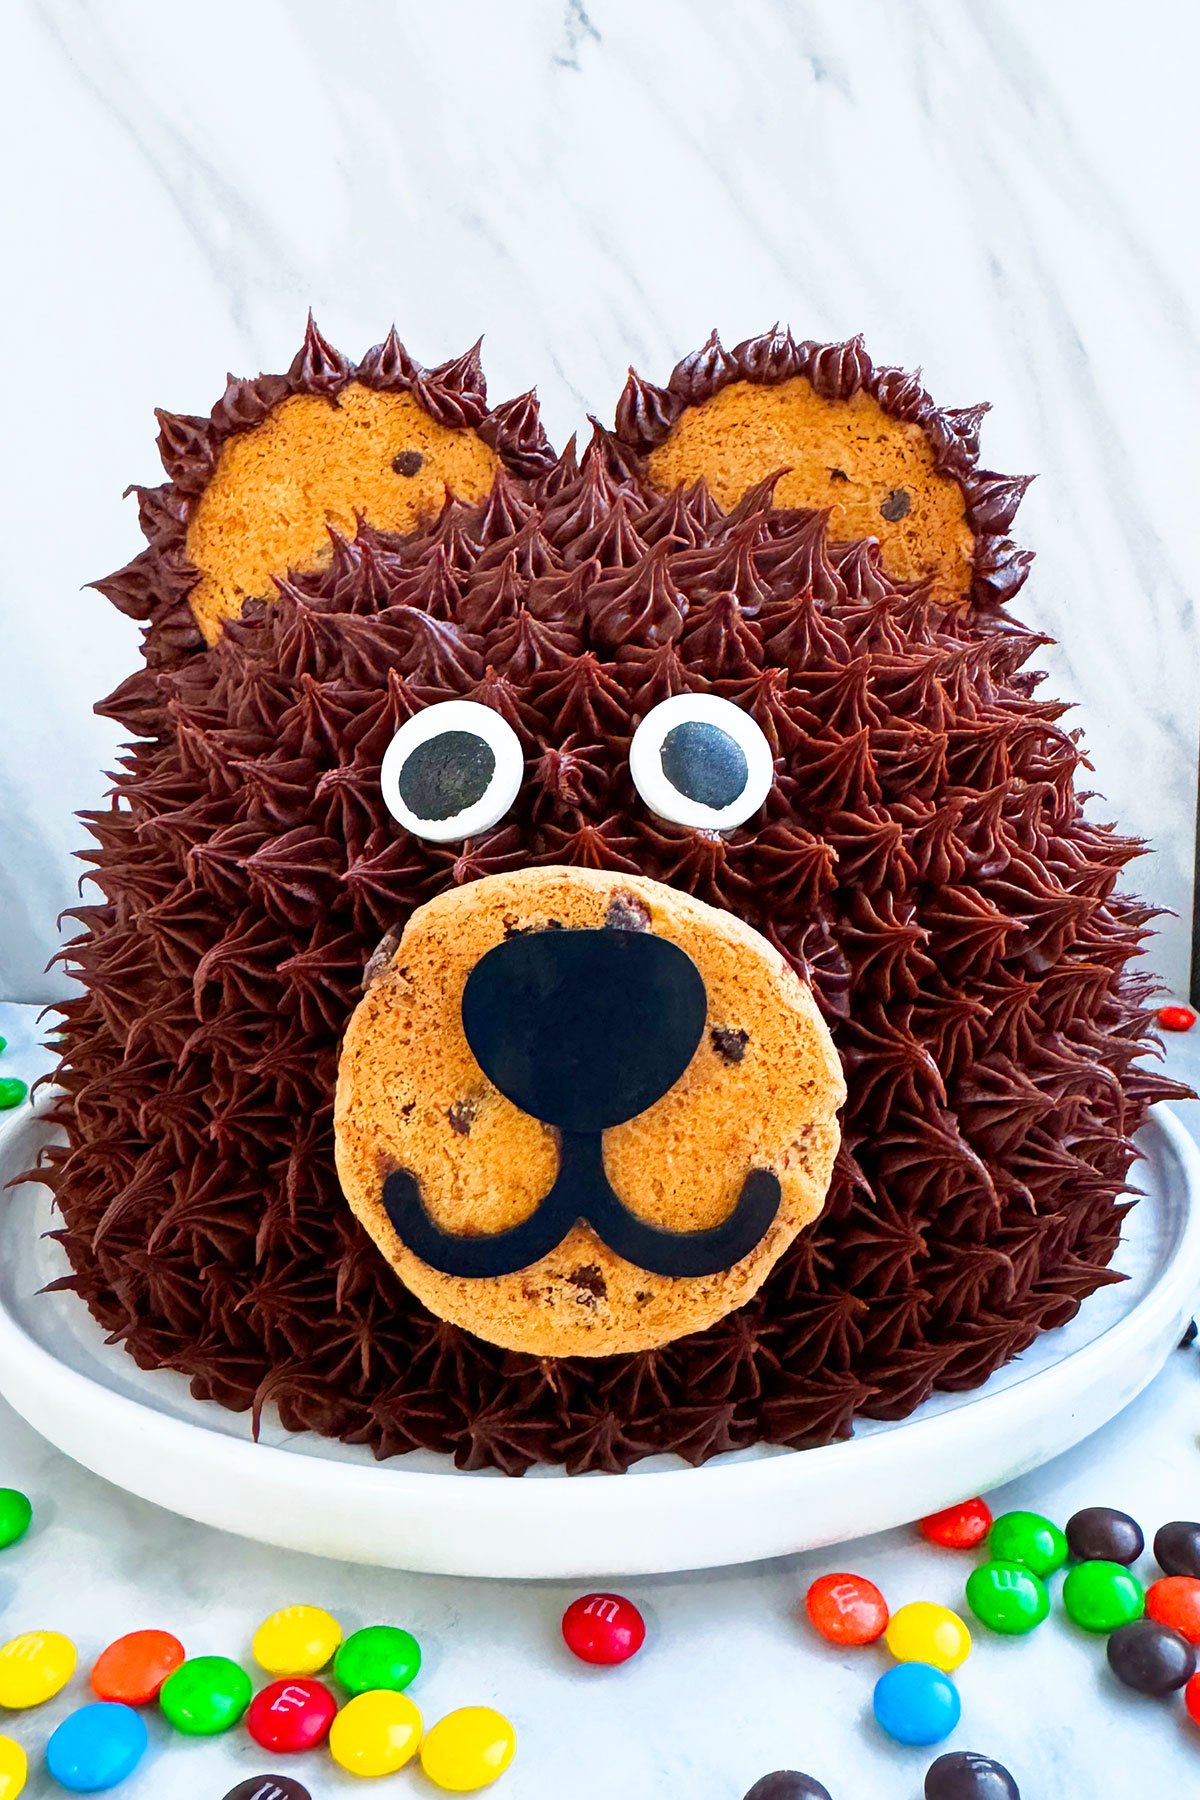 Easy Teddy Bear Cake With Chocolate Frosting on White Dish.